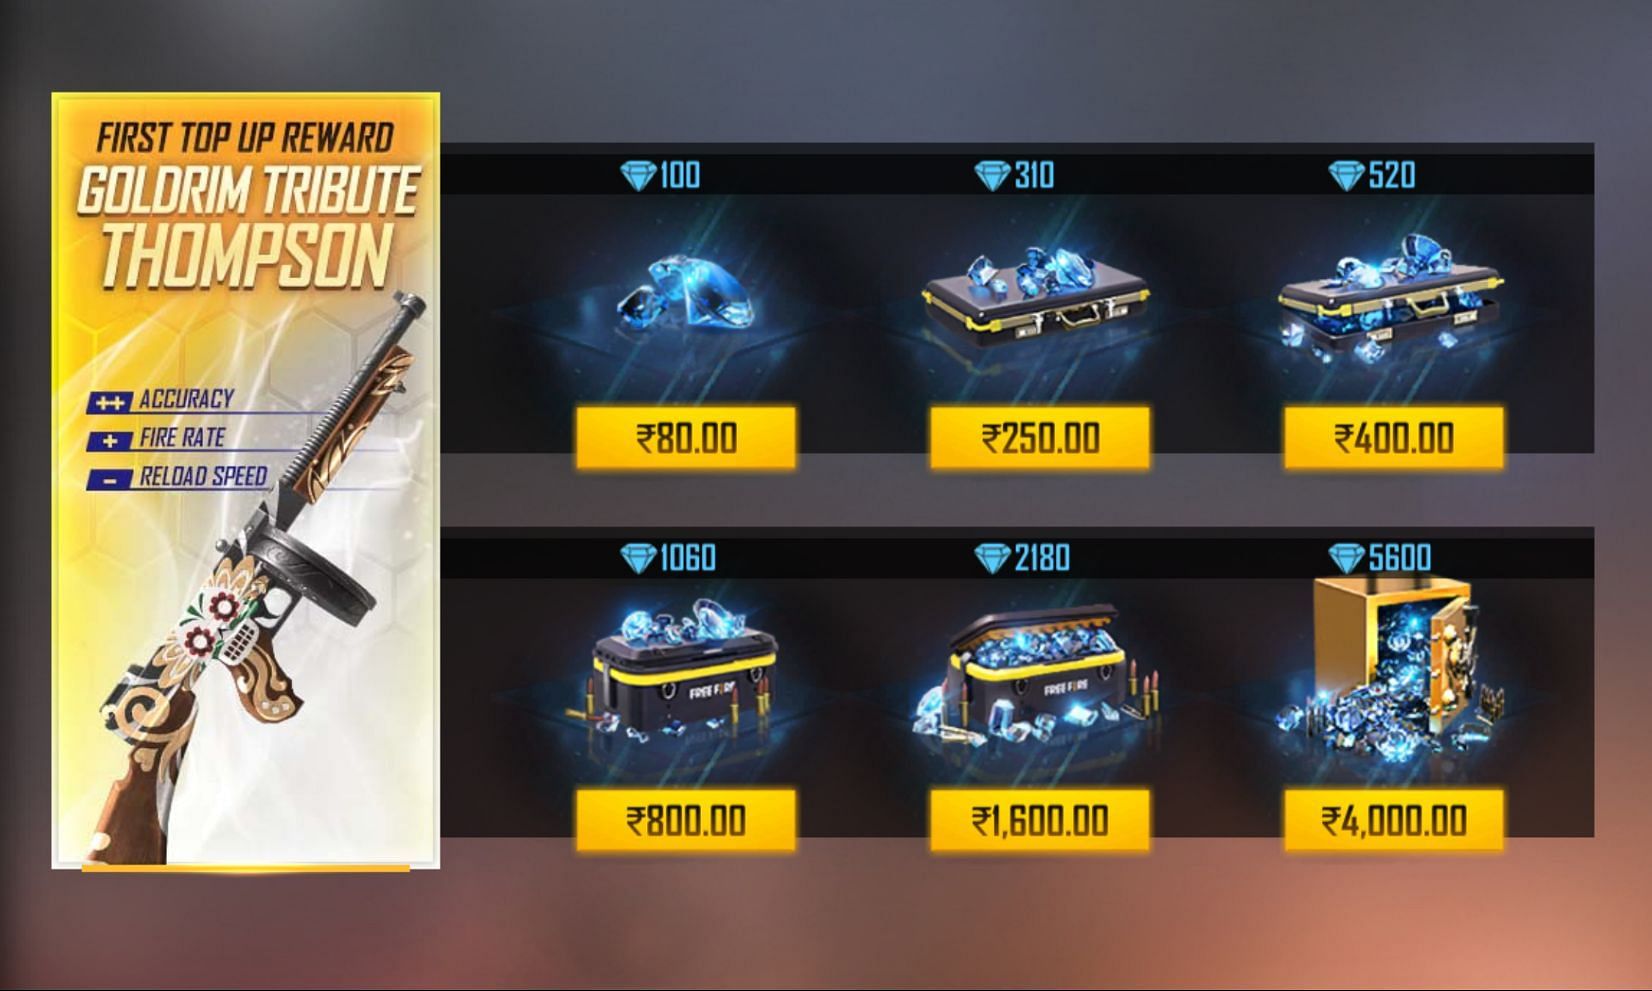 Users can purchase the desired pack of diamonds (Image via Garena)